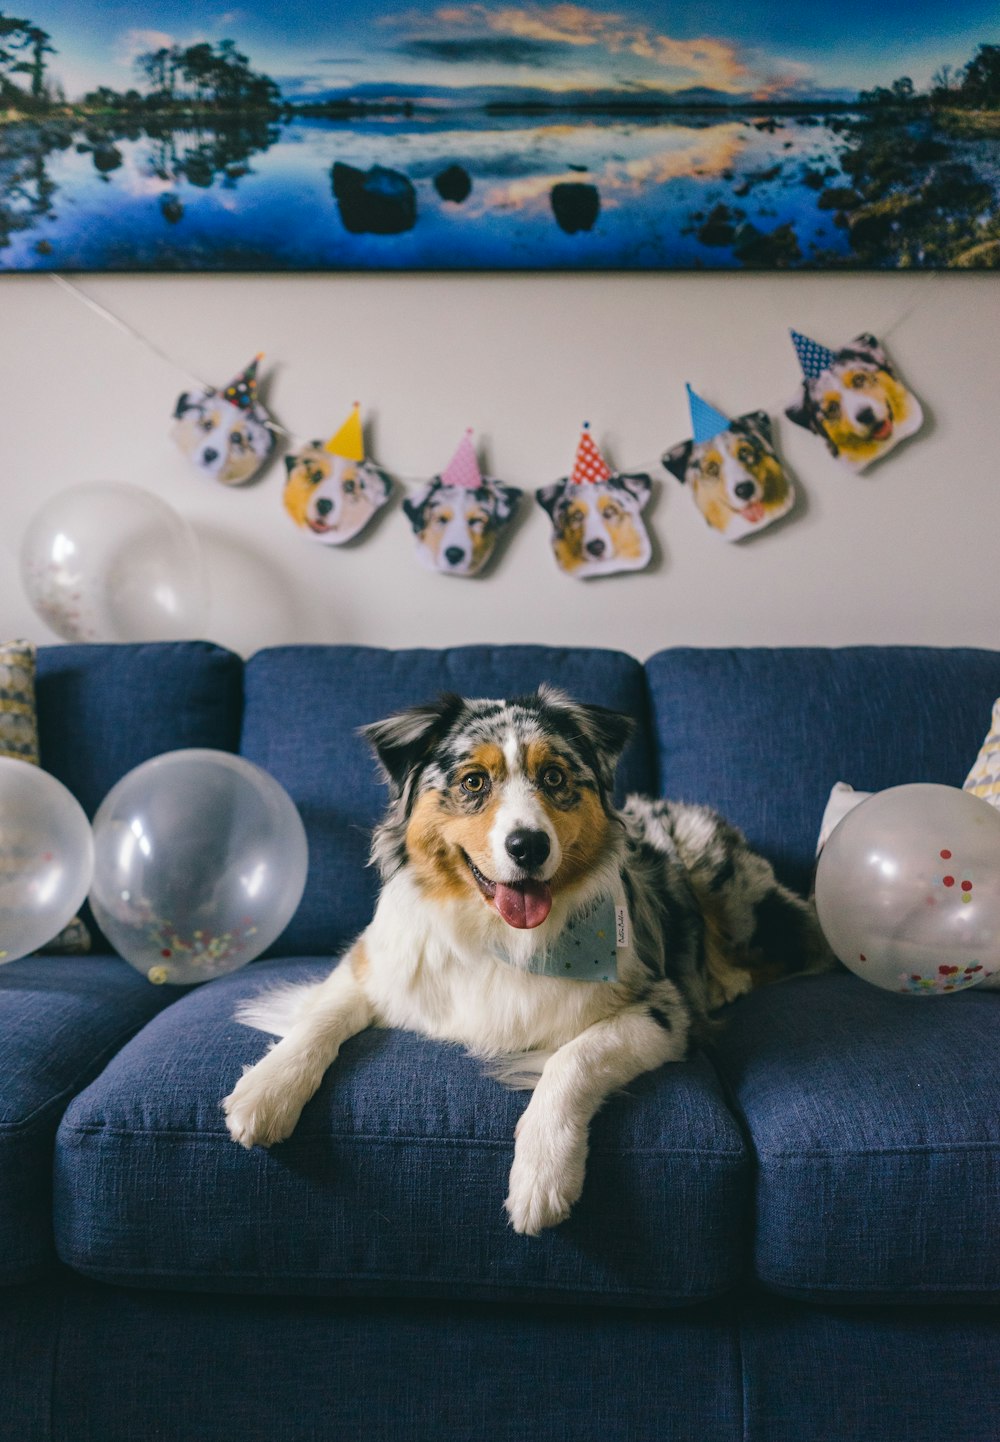 a dog sitting on a blue couch in front of balloons